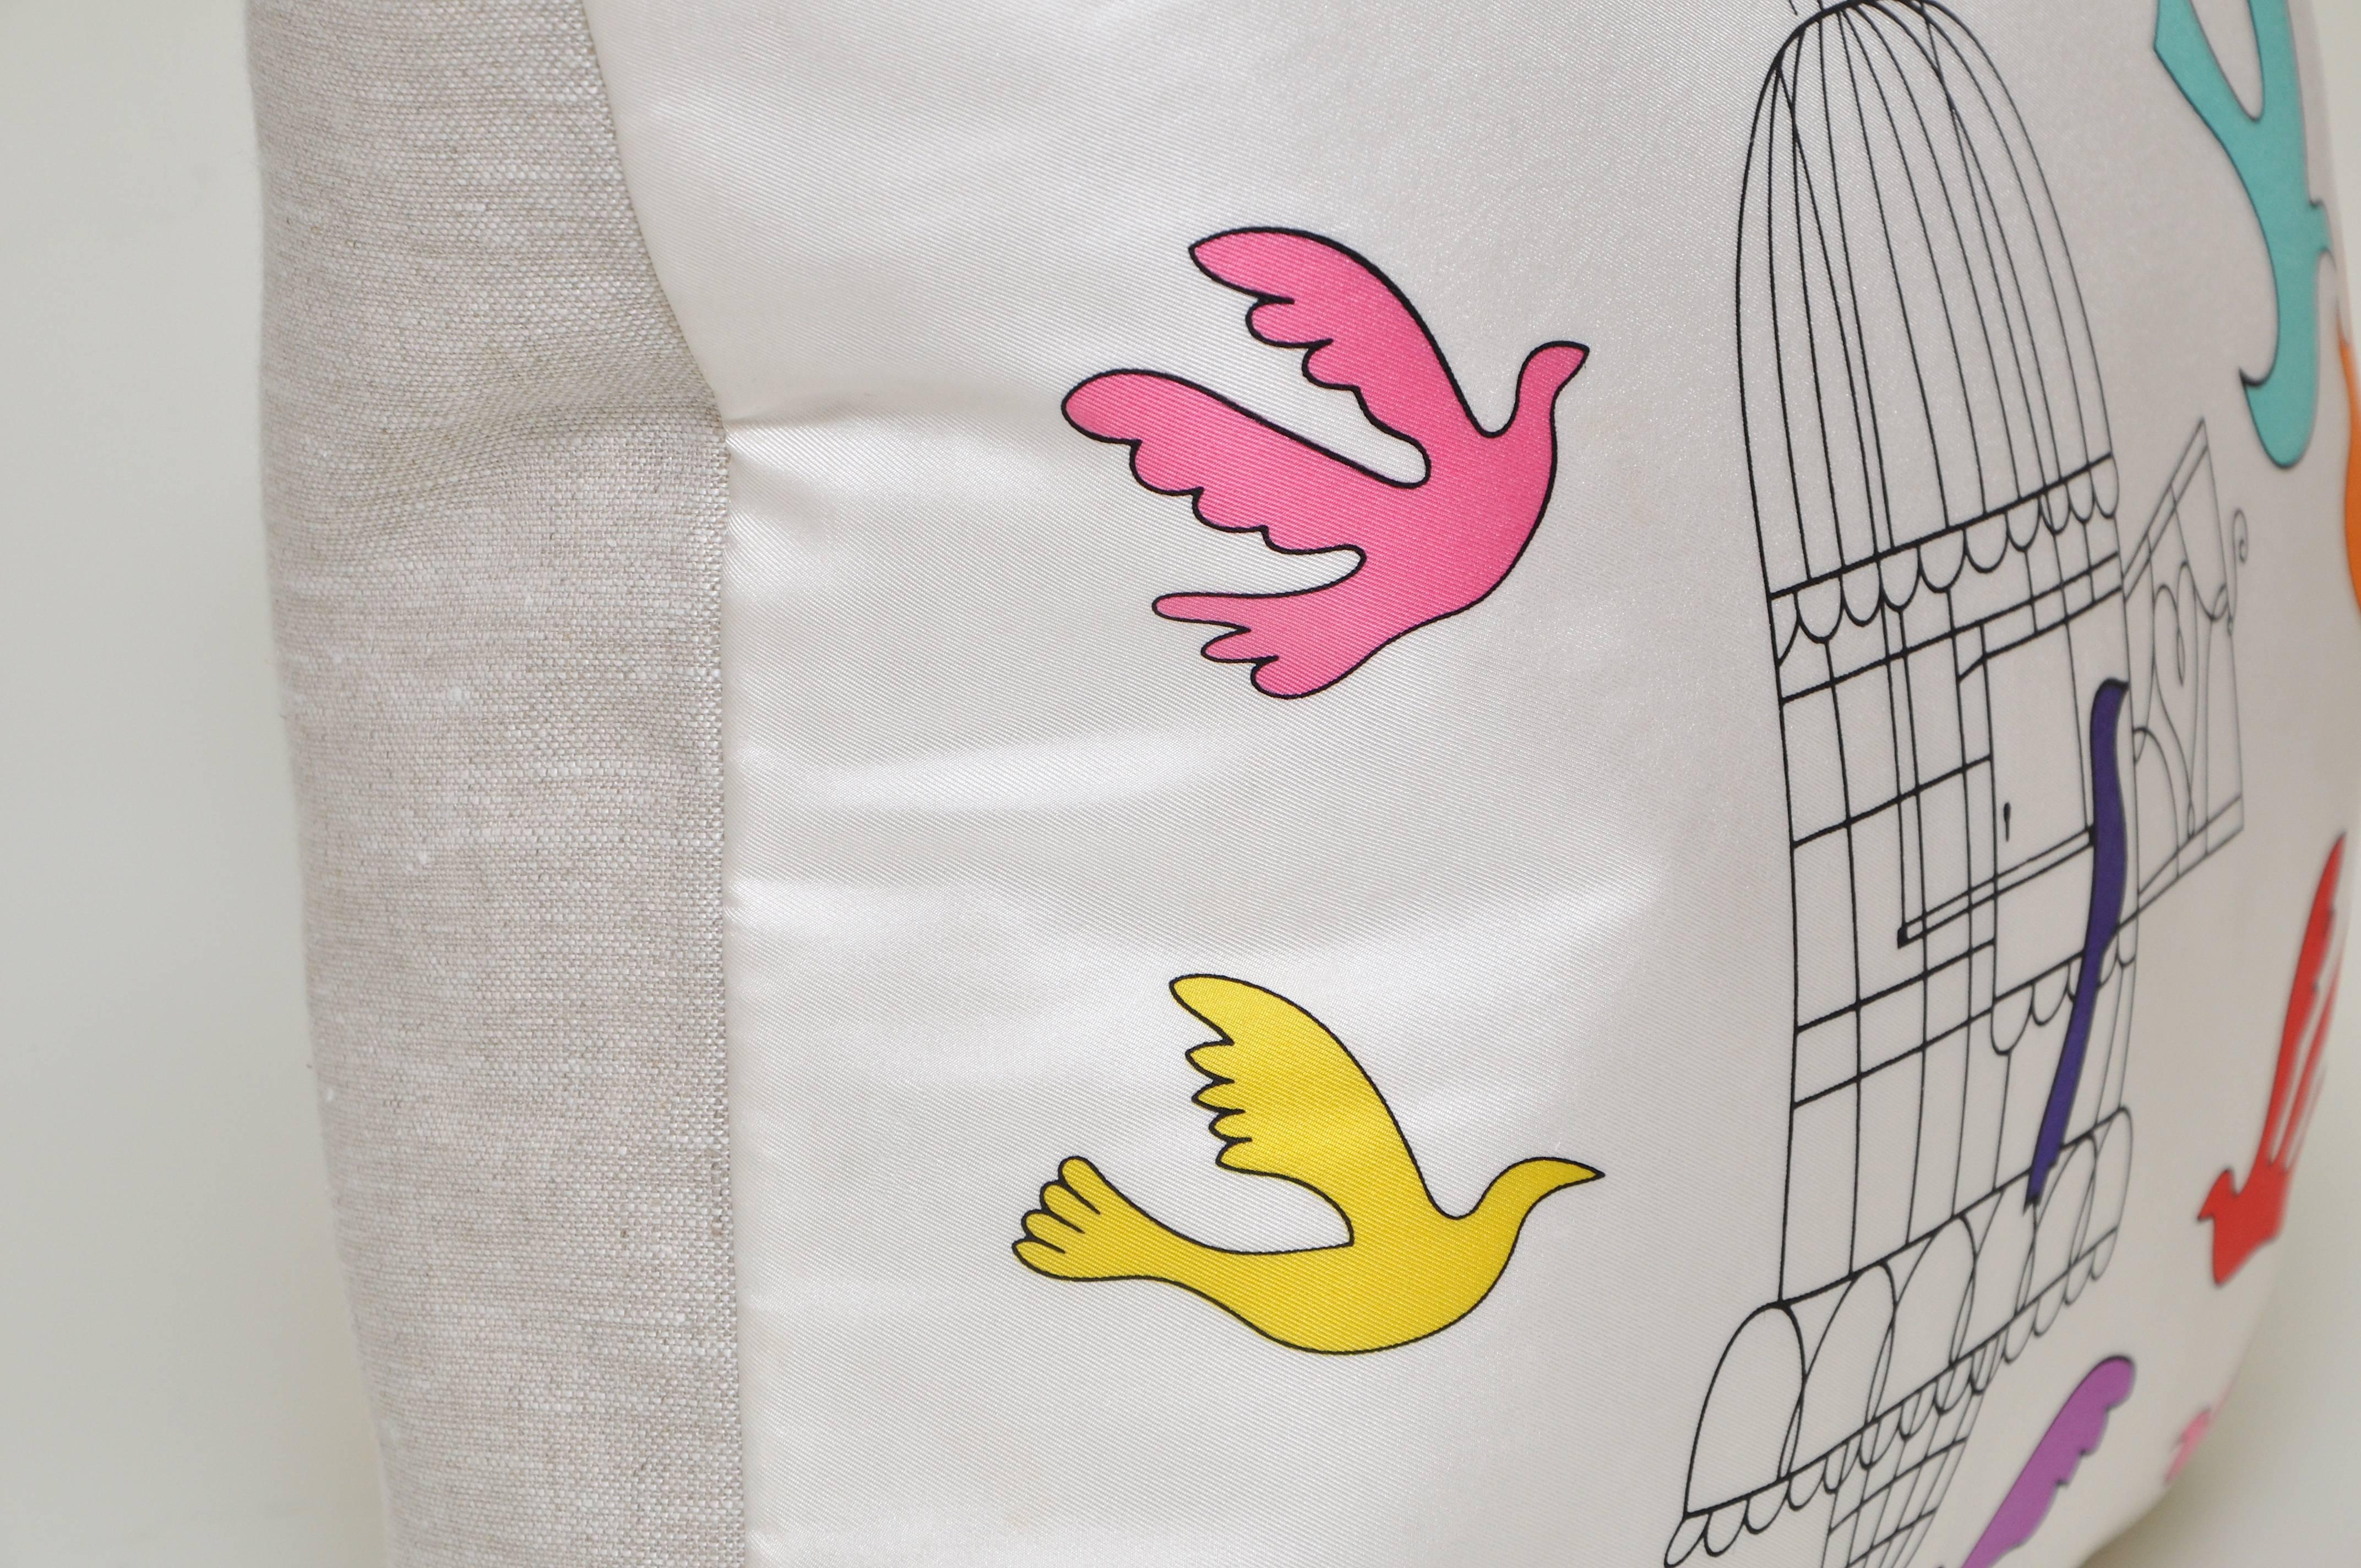 Custom-made one-of-a-kind luxury cushion created from a beautiful vintage silk Nina Ricci fashion scarf in an exquisite birdcage and flying birds design. A delightful picture illustrating a flock of multicolored stylised birds seemingly being